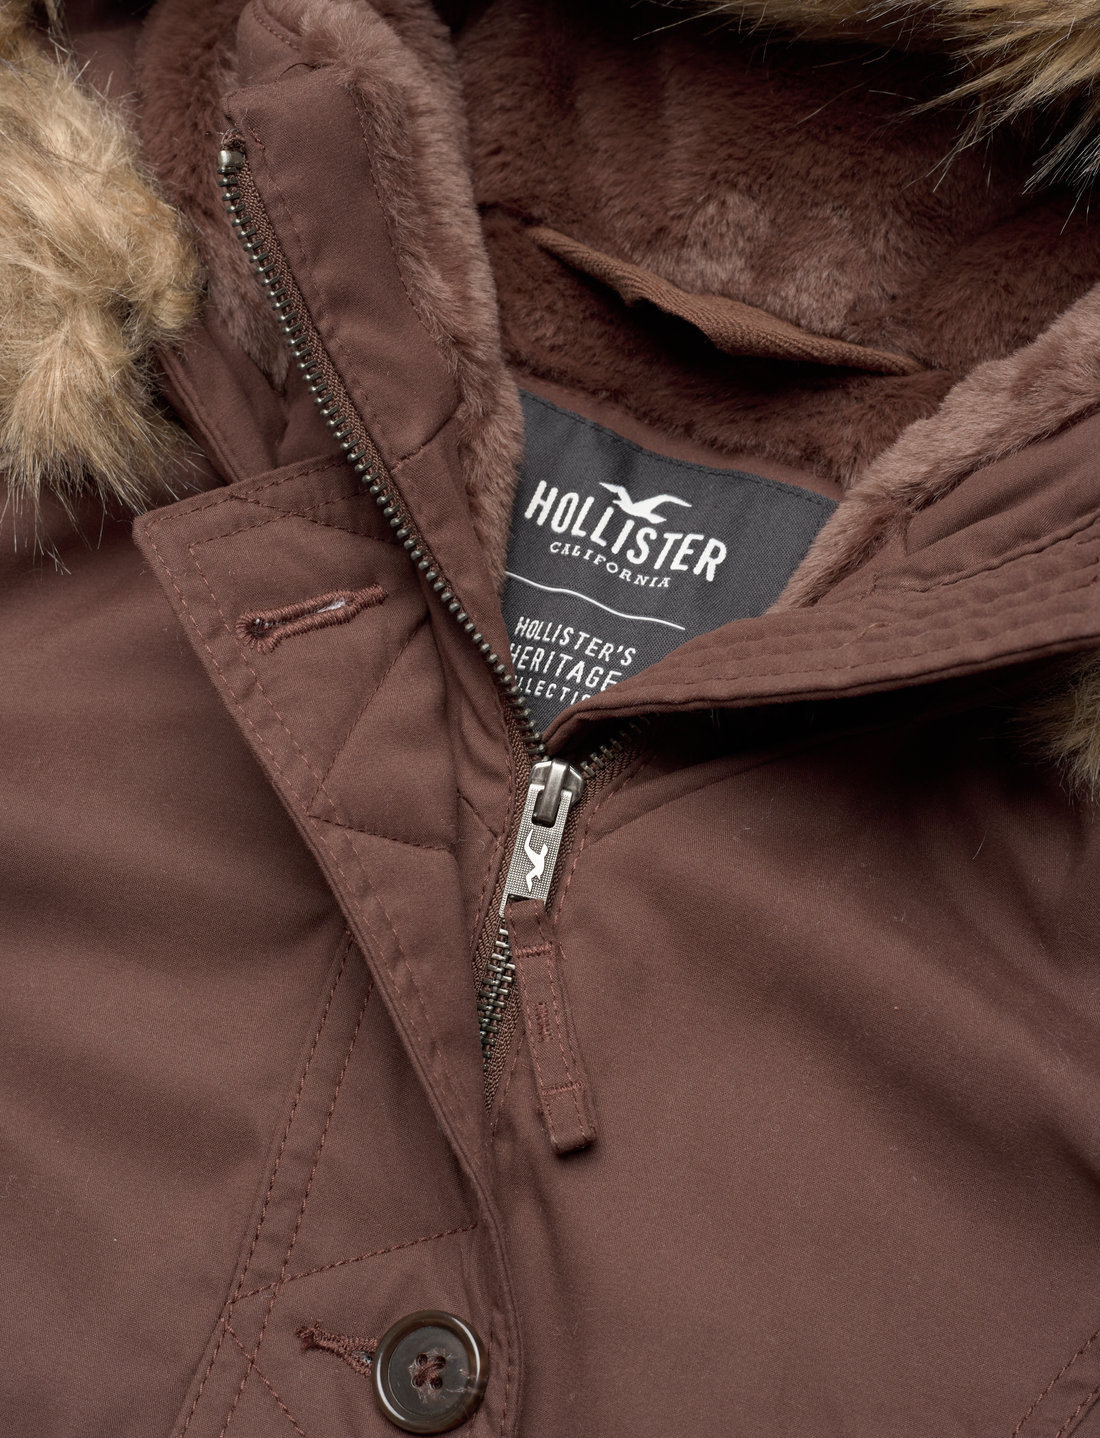 Hollister Hco. Girls Outerwear - 64 €. Buy Parka Coats from Hollister  online at . Fast delivery and easy returns